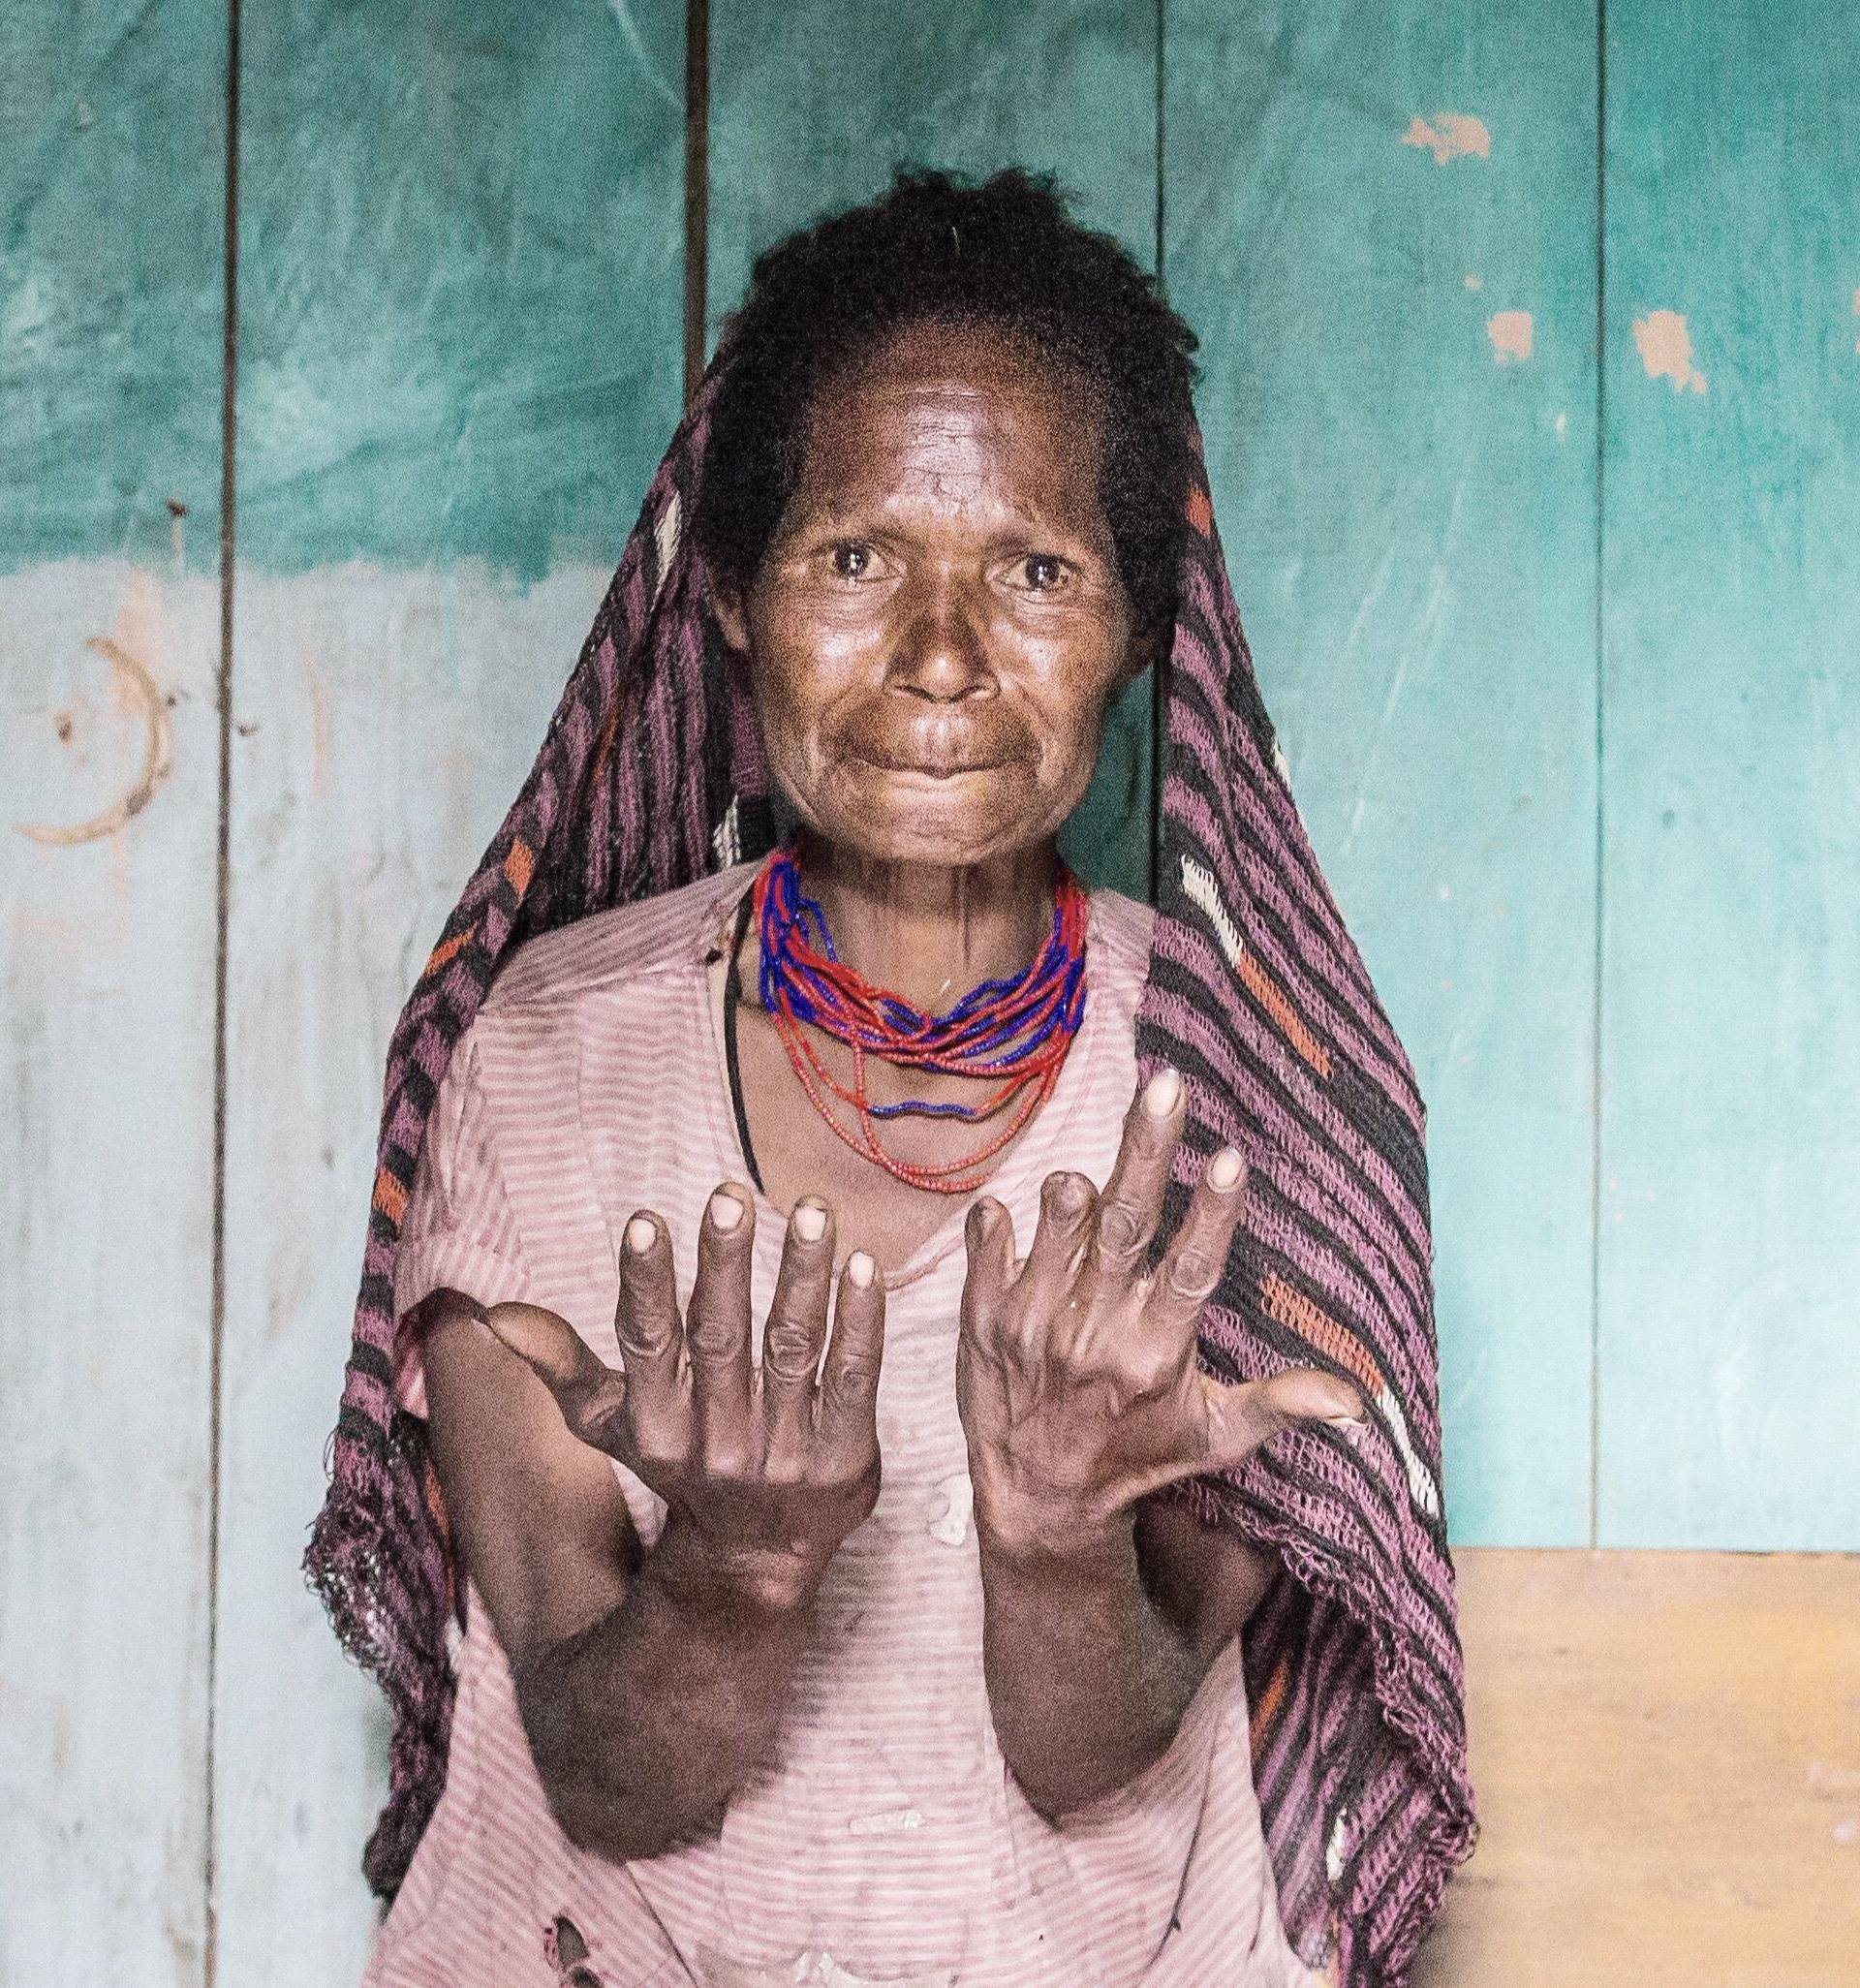 Missing fingers. Dani tribe ladies cut off their fingers to demonstrate their pain at the loss of a younger family member. West Papua, Indonesia